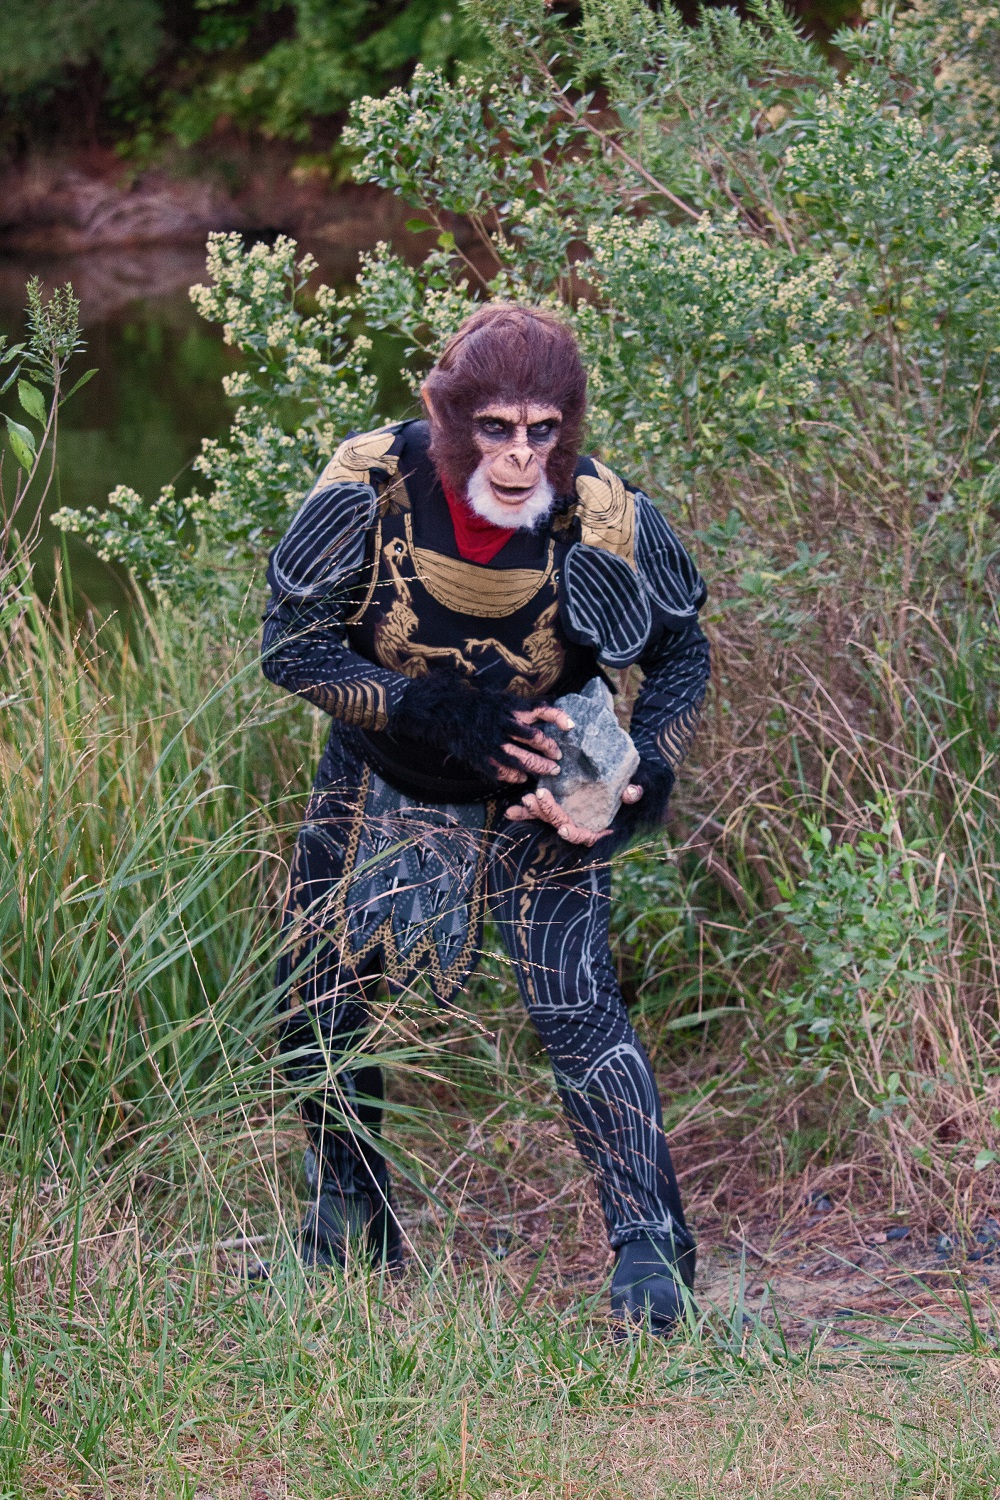 Chimp prosthetic from @Mostlyded.com Makeup& Application & modeled by me.